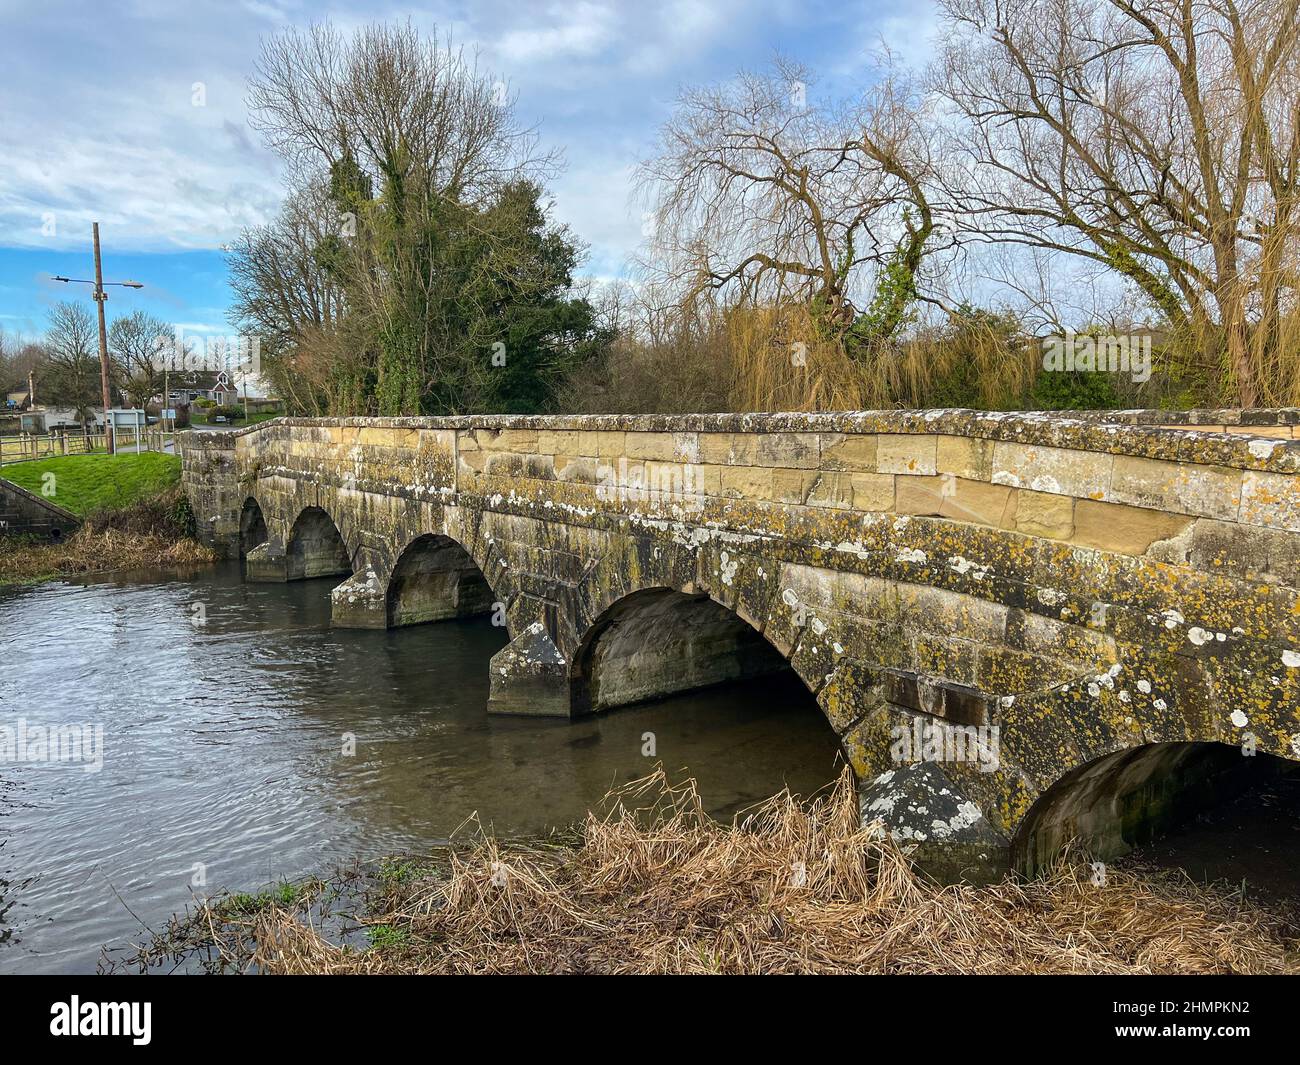 The Queensberry bridge that crosses the river Avon at Amesbury was built in 1775, Wiltshire, UK. Stock Photo